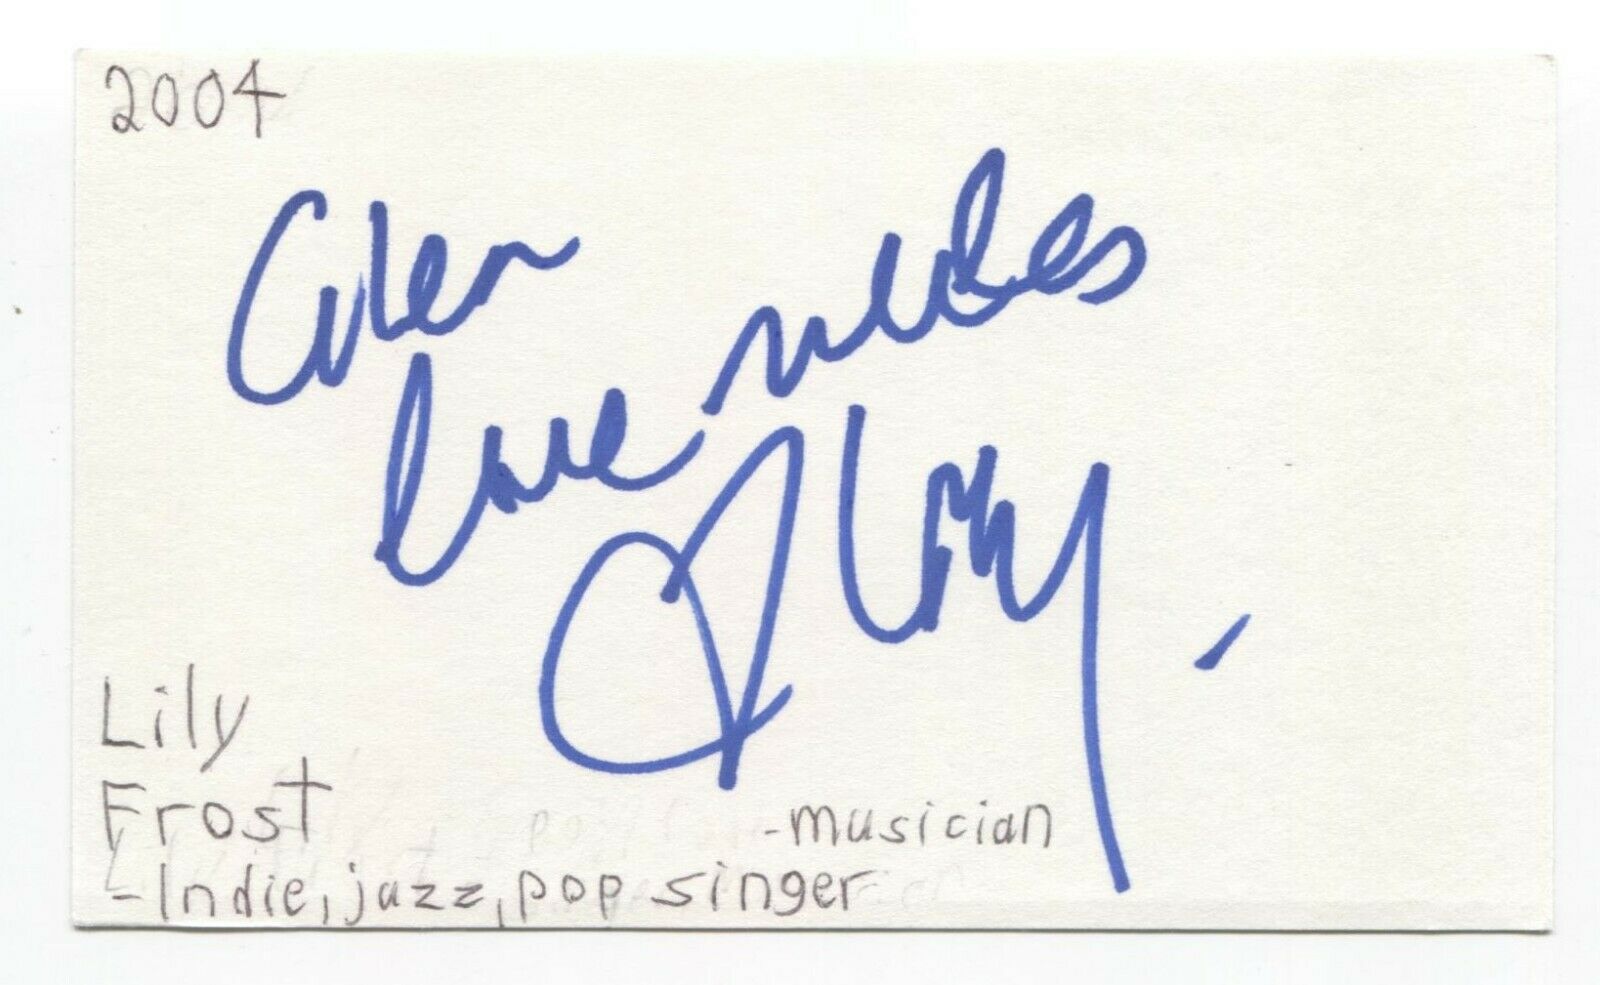 Lily Frost Signed 3x5 Index Card Autographed Signature Singer